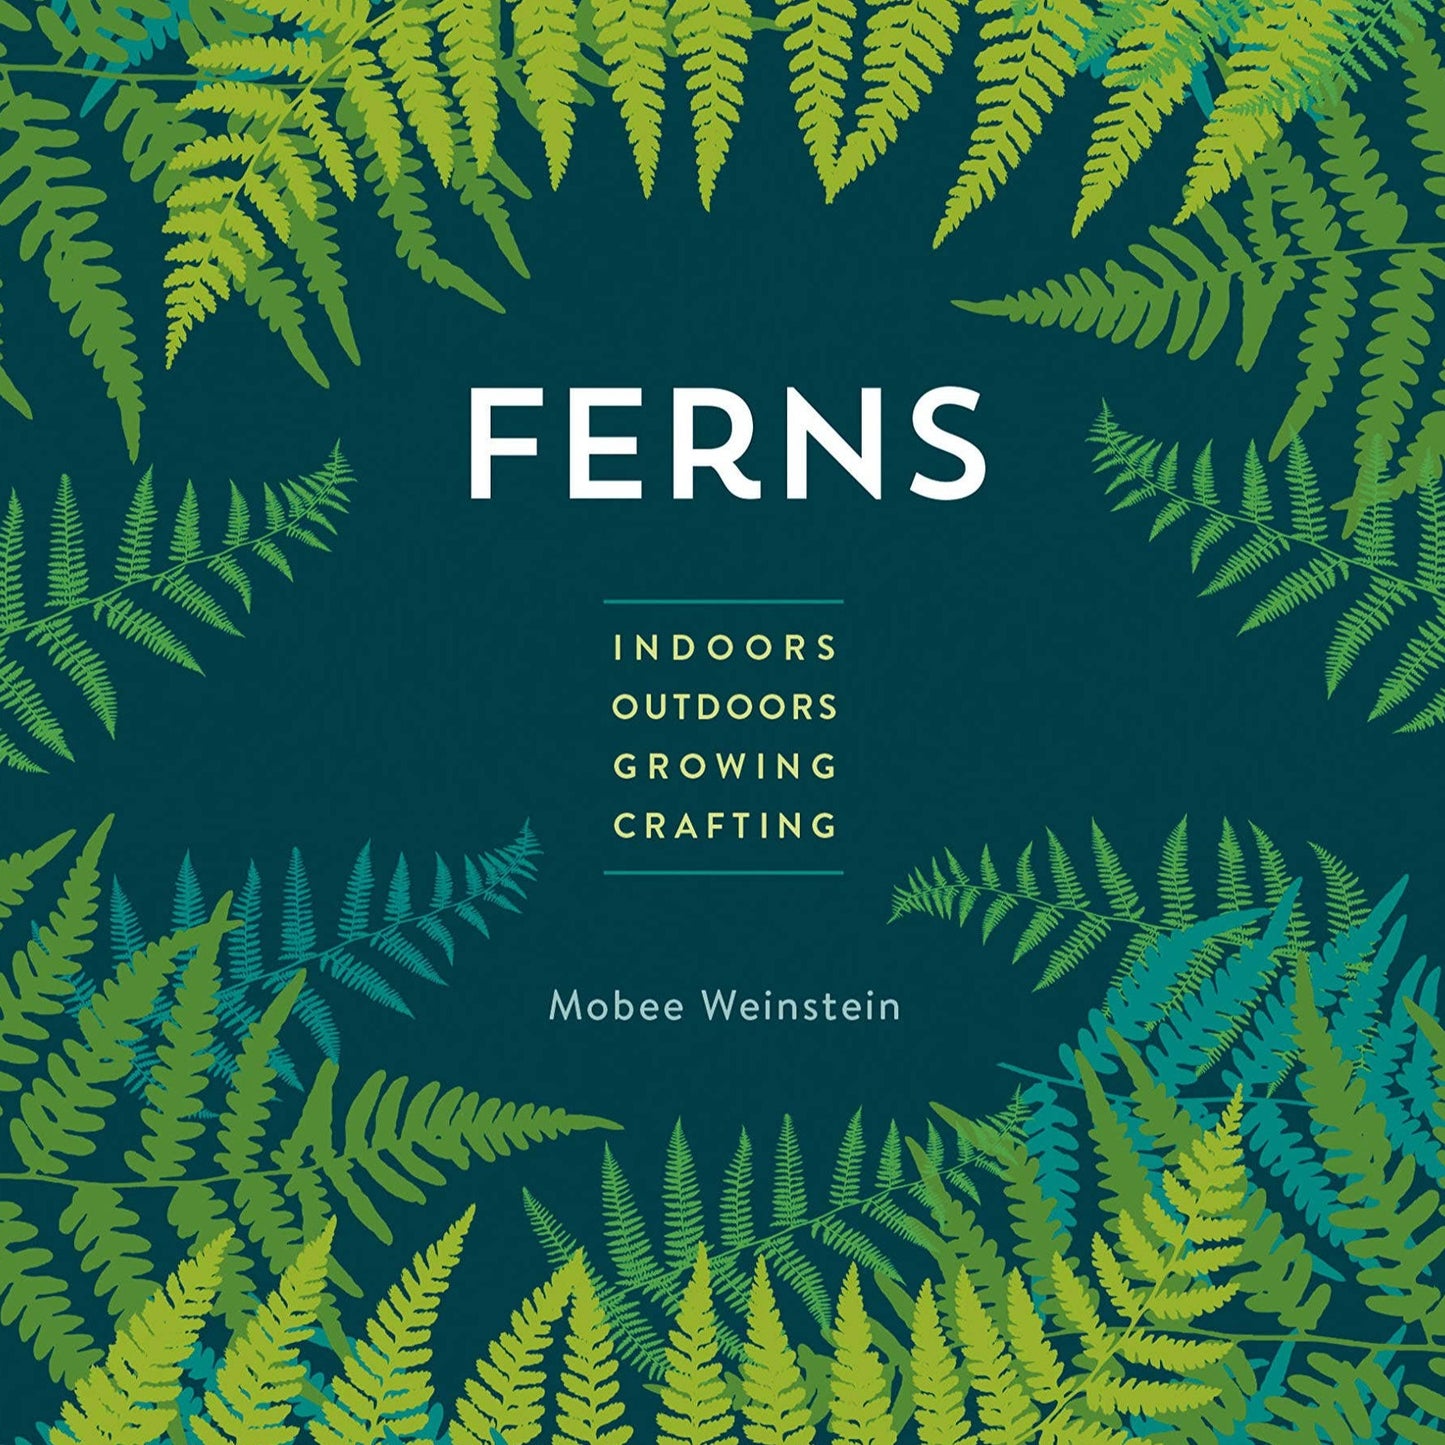 Ferns: Indoors, Outdoors, Growing, Crafting